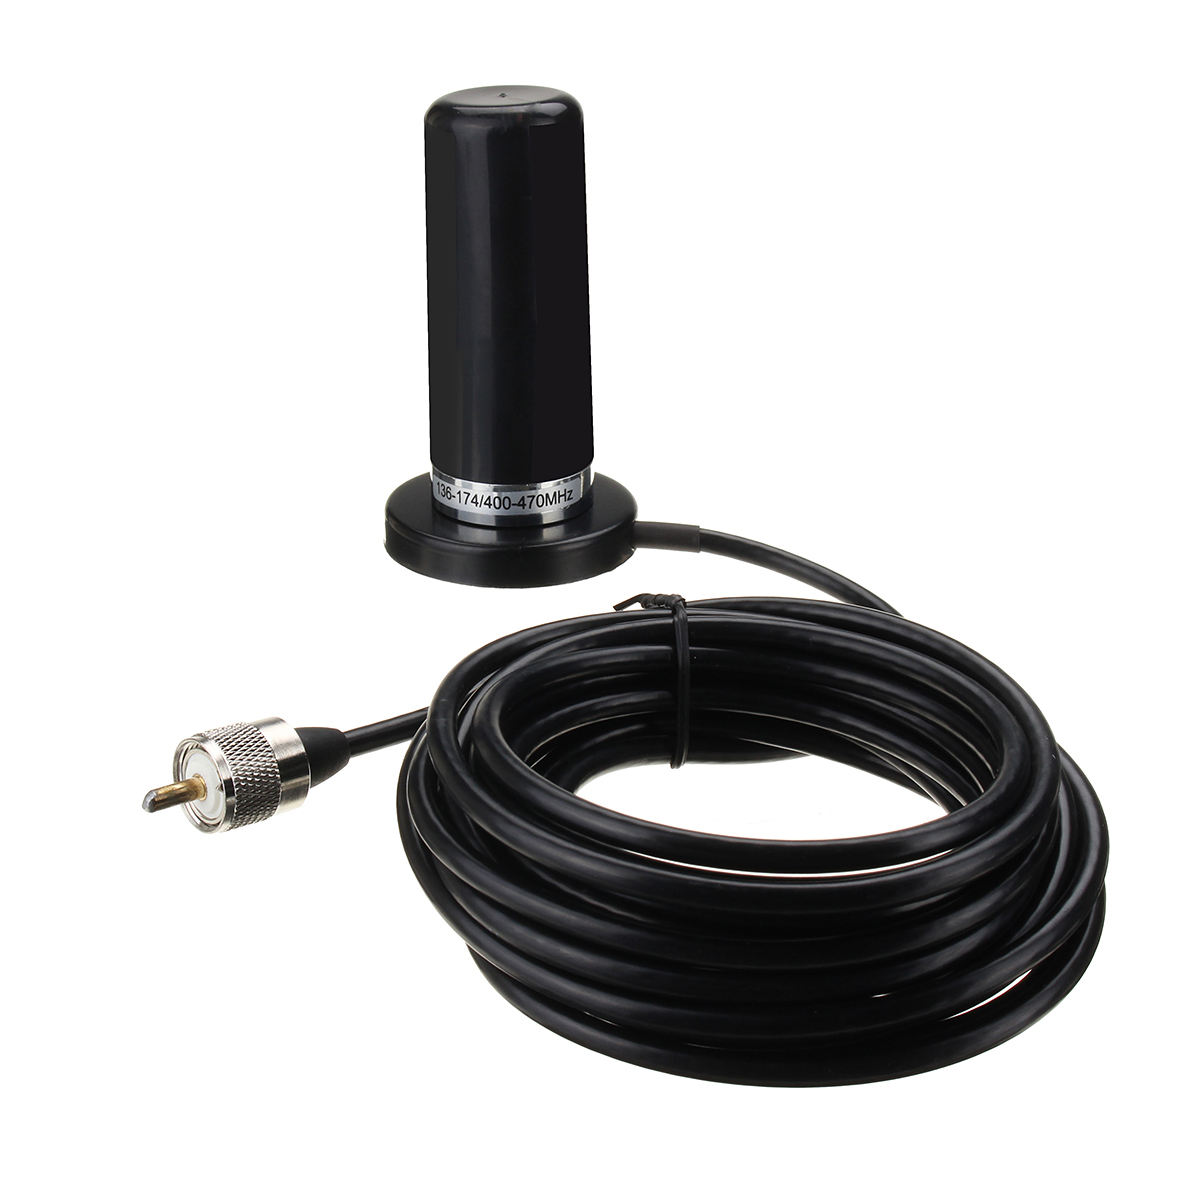 

Dual Band Vehicle Car Antenna Mobile Radio Magnetic Mount Base Cable w/ Sucker